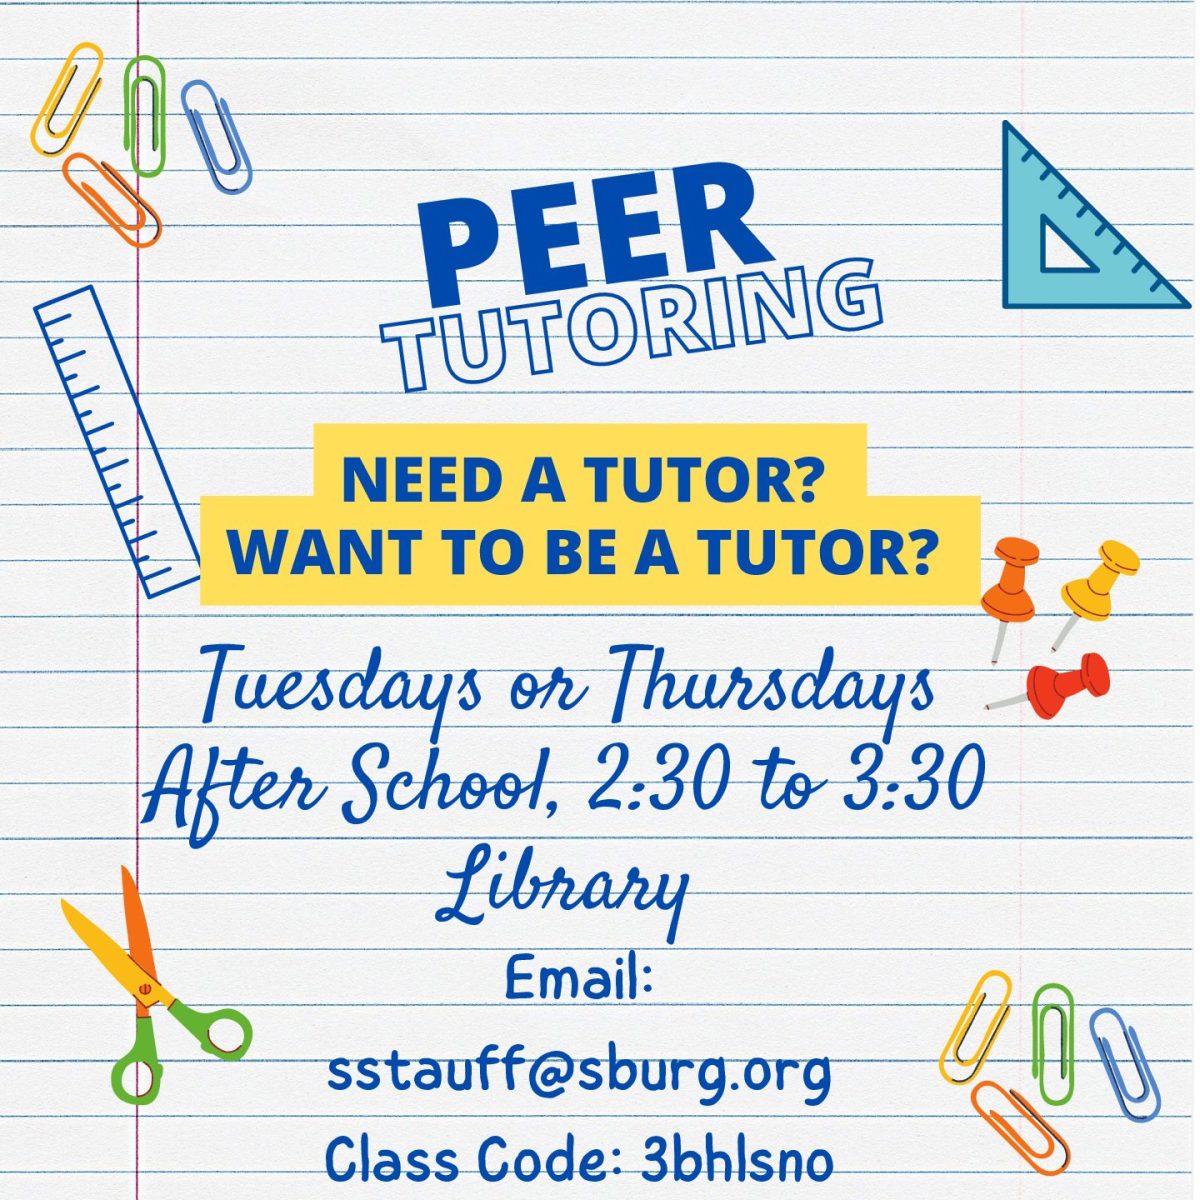 Sign up for peer tutoring today for help in any subject you may be struggling in!